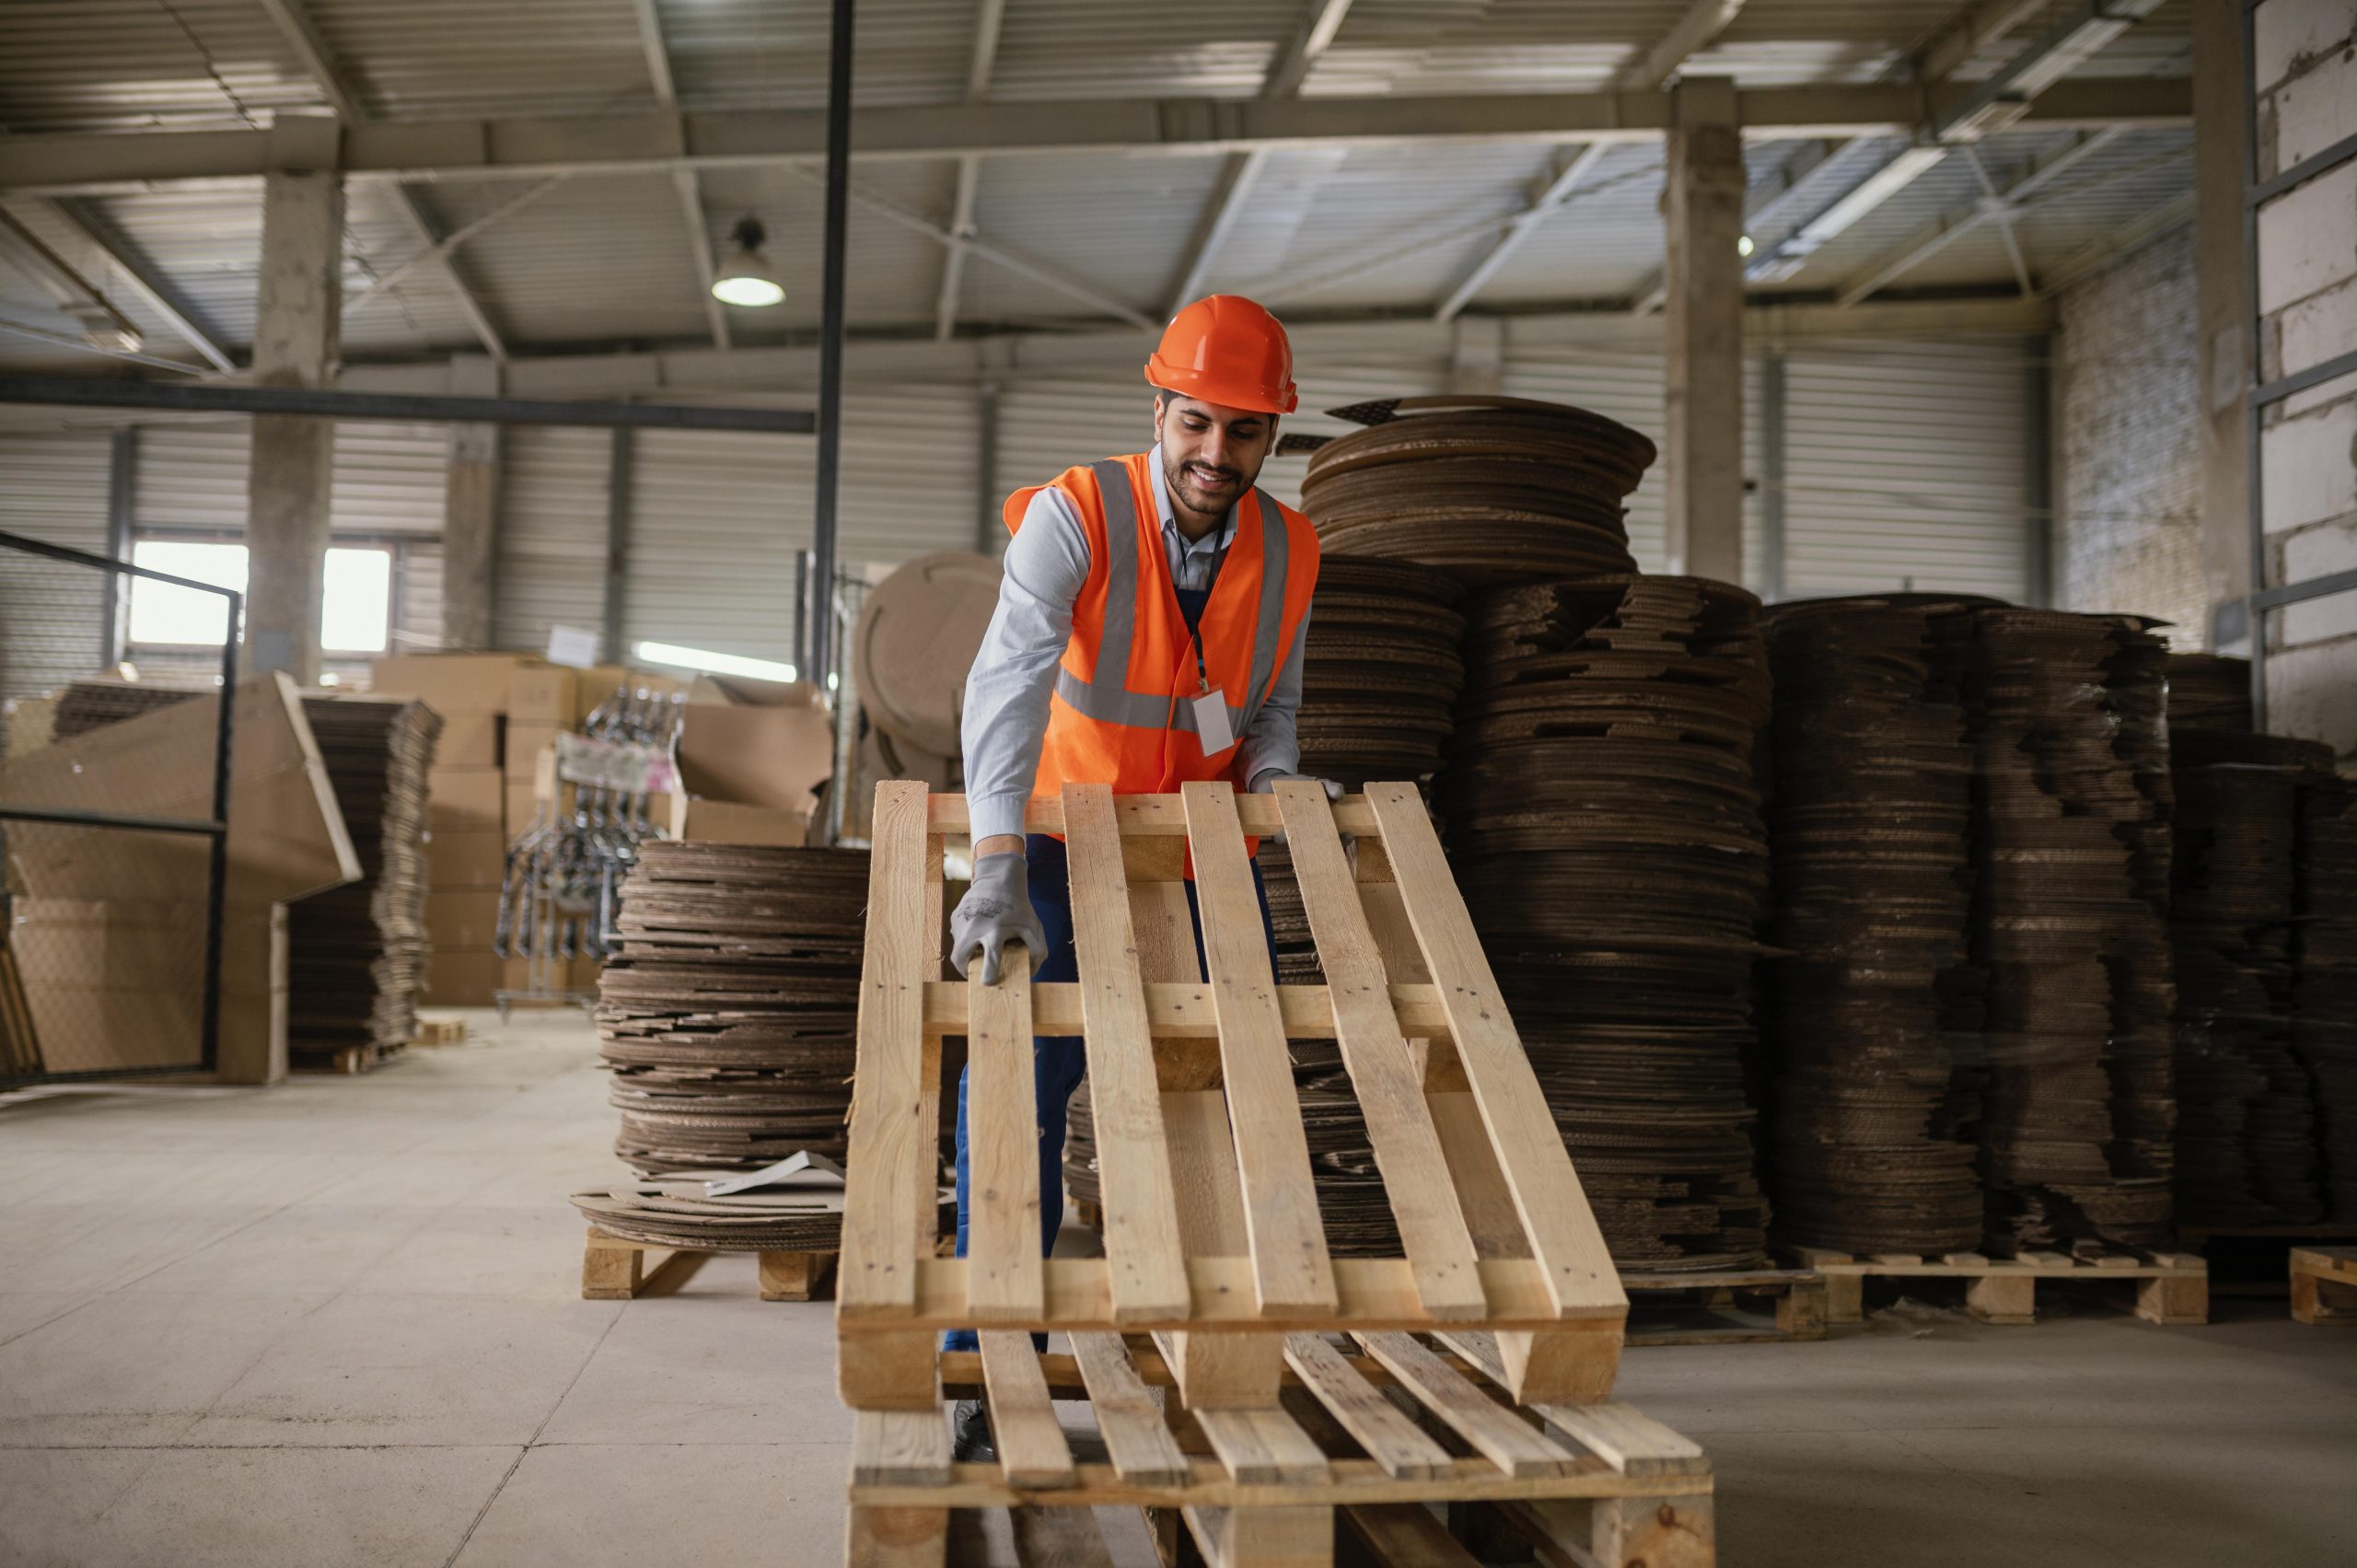 Man working with heavy wooden material